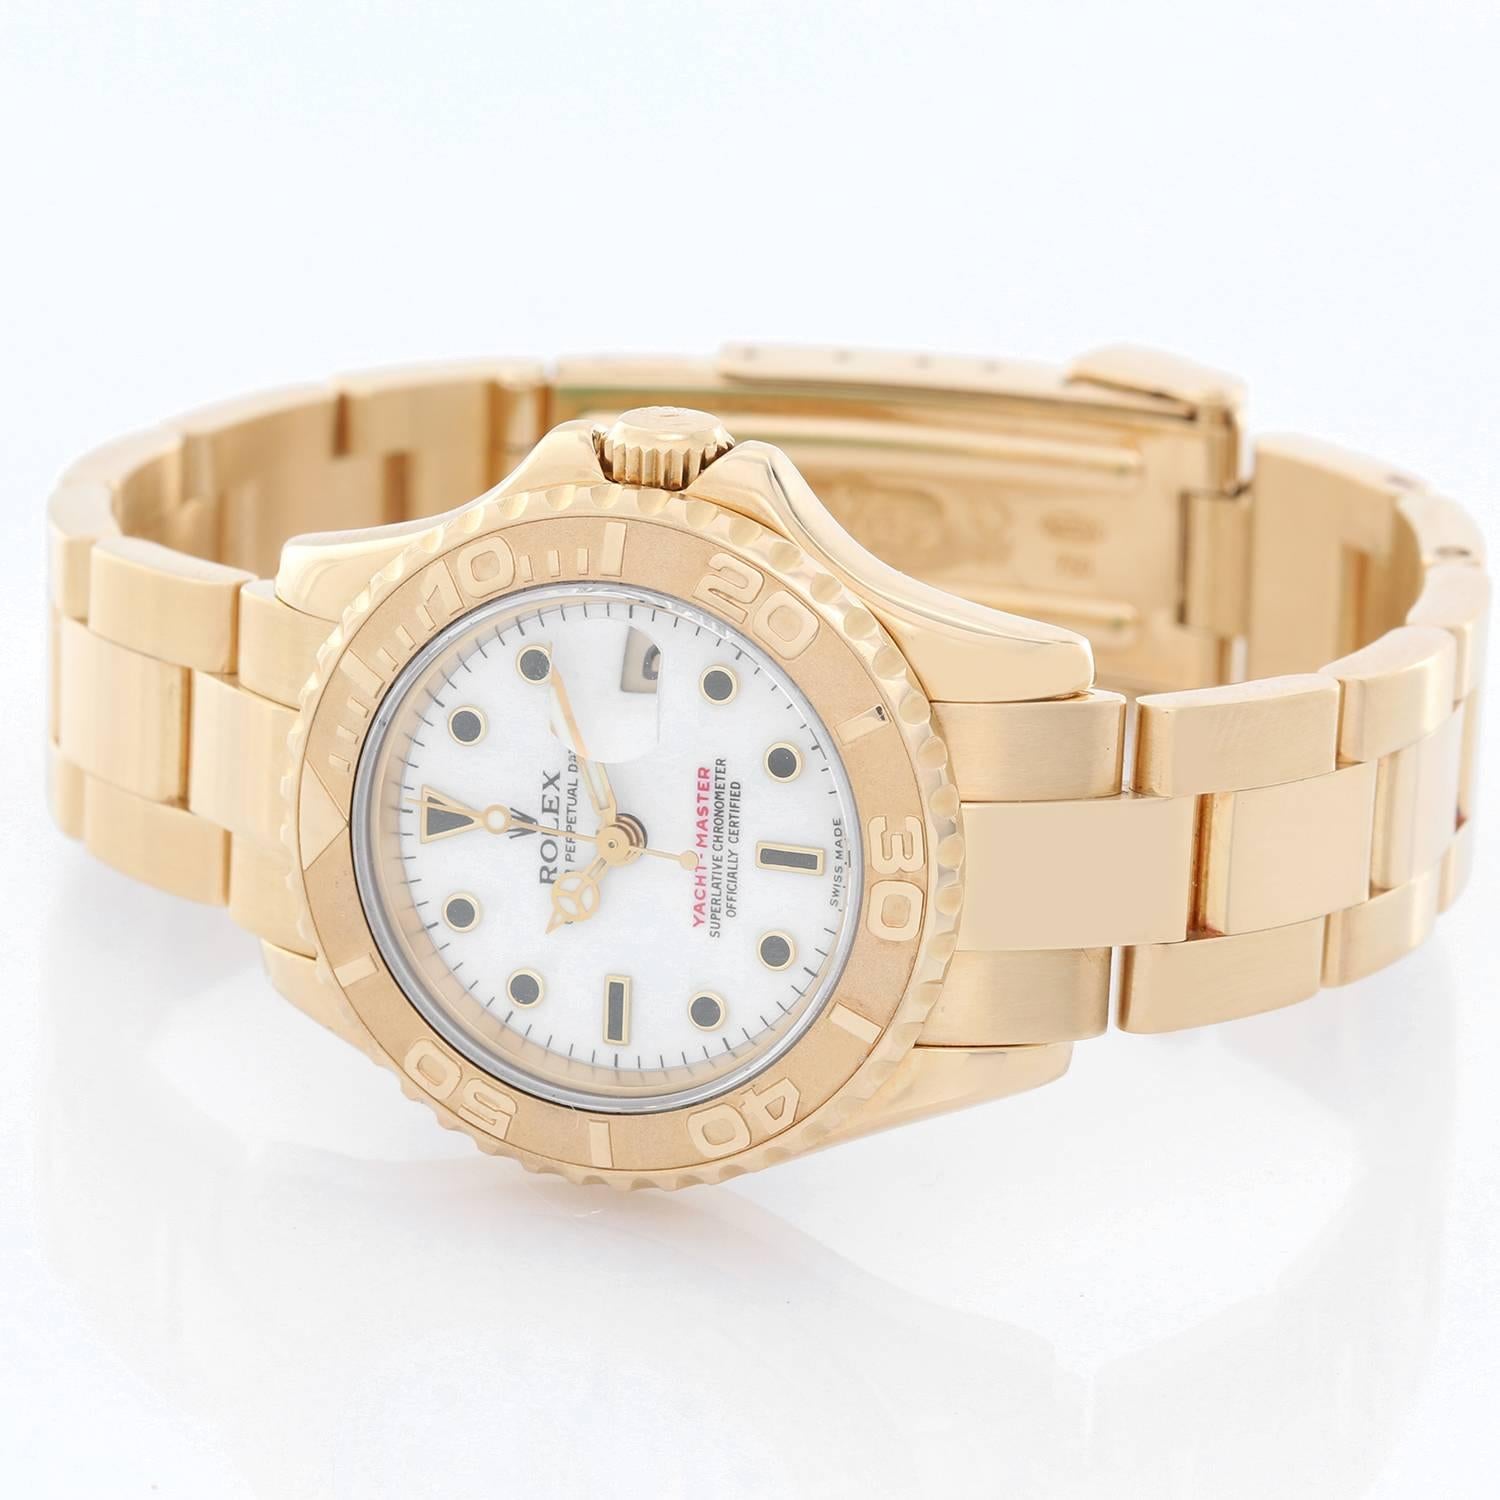 Rolex Lady Yacht-Master 18k Gold Ladies Watch 69628 -  Automatic winding, 29 jewels, Quickset date, sapphire crystal. 18k yellow gold case with rotating bezel (29mm diameter). White dial. 18k yellow gold Oyster bracelet with flip-lock clasp.